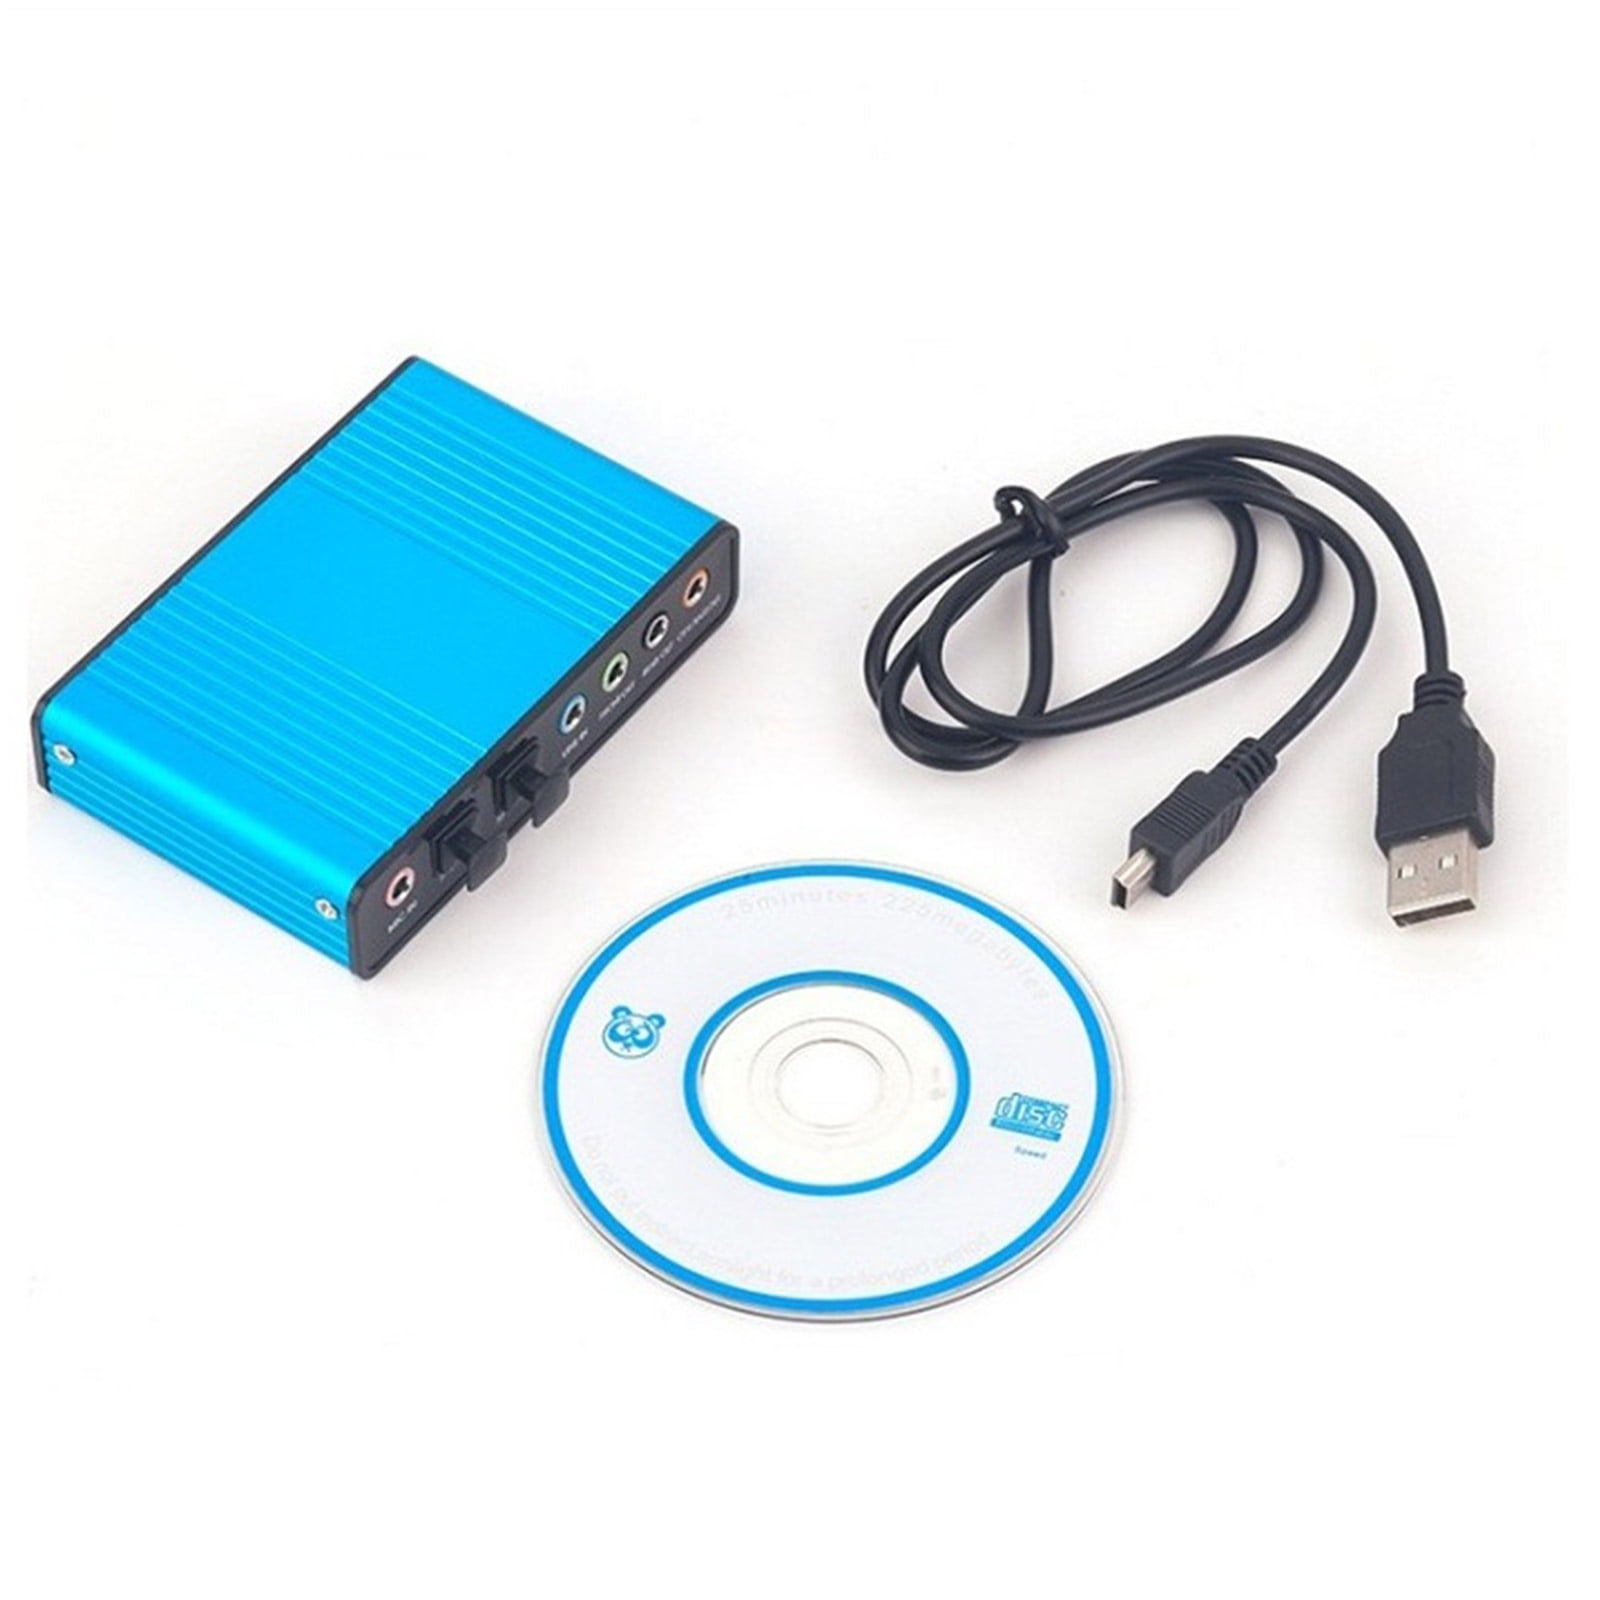 Glat Banzai Cater Whigetiy USB External Sound Card 6 Channel 5.1/7.1 Surround Audio Adapter  for PC Laptop - Walmart.com